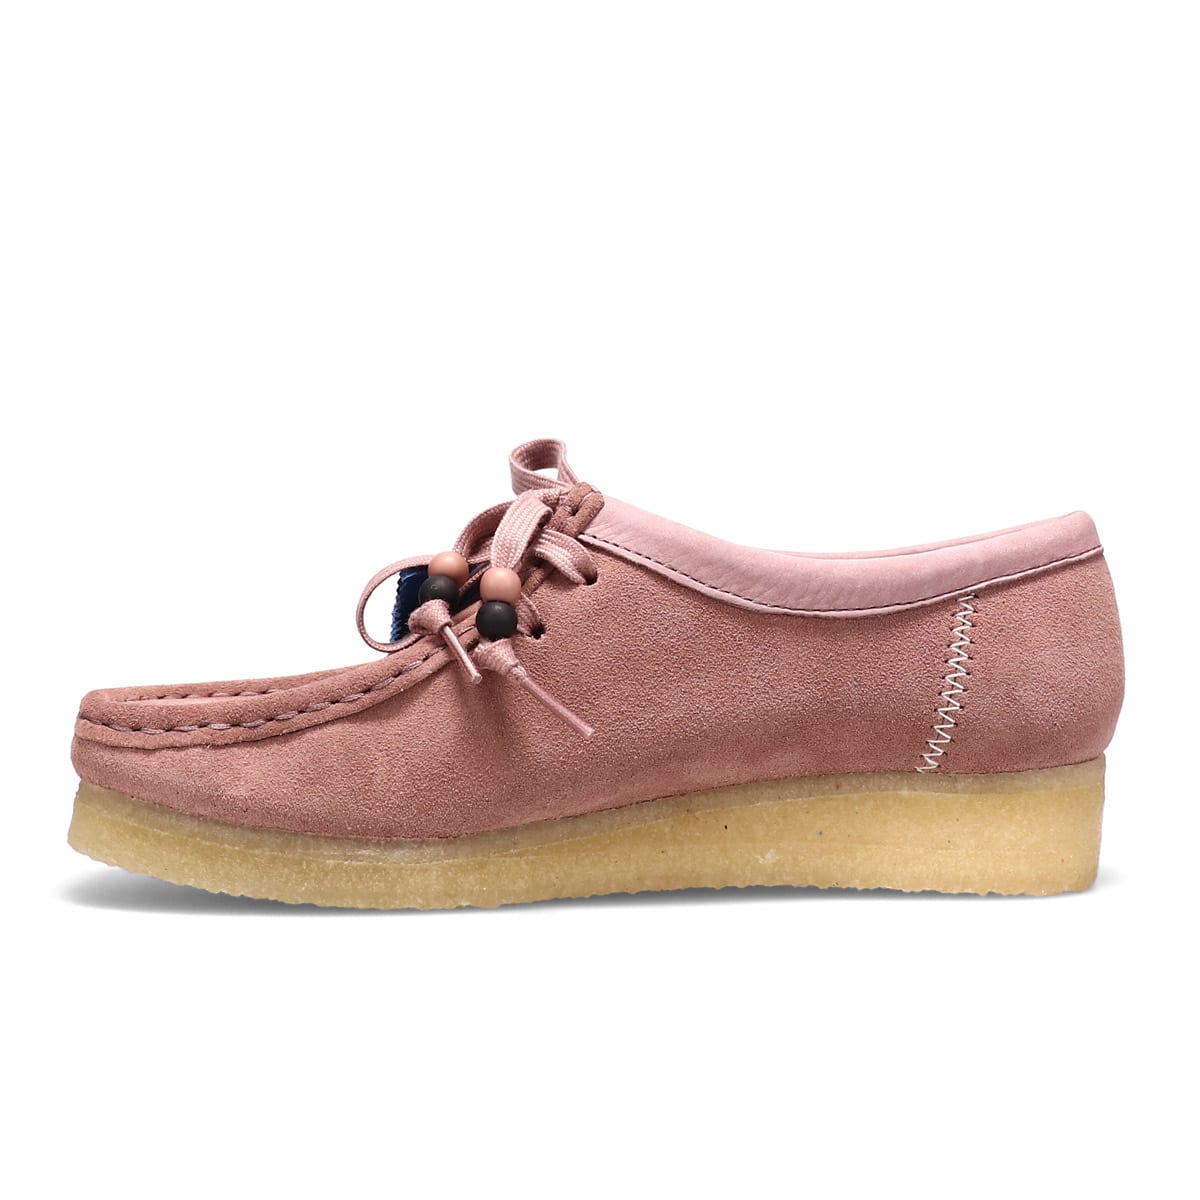 Clarks Wmns Wallabee ANNA SUI atmos Dusty Pink